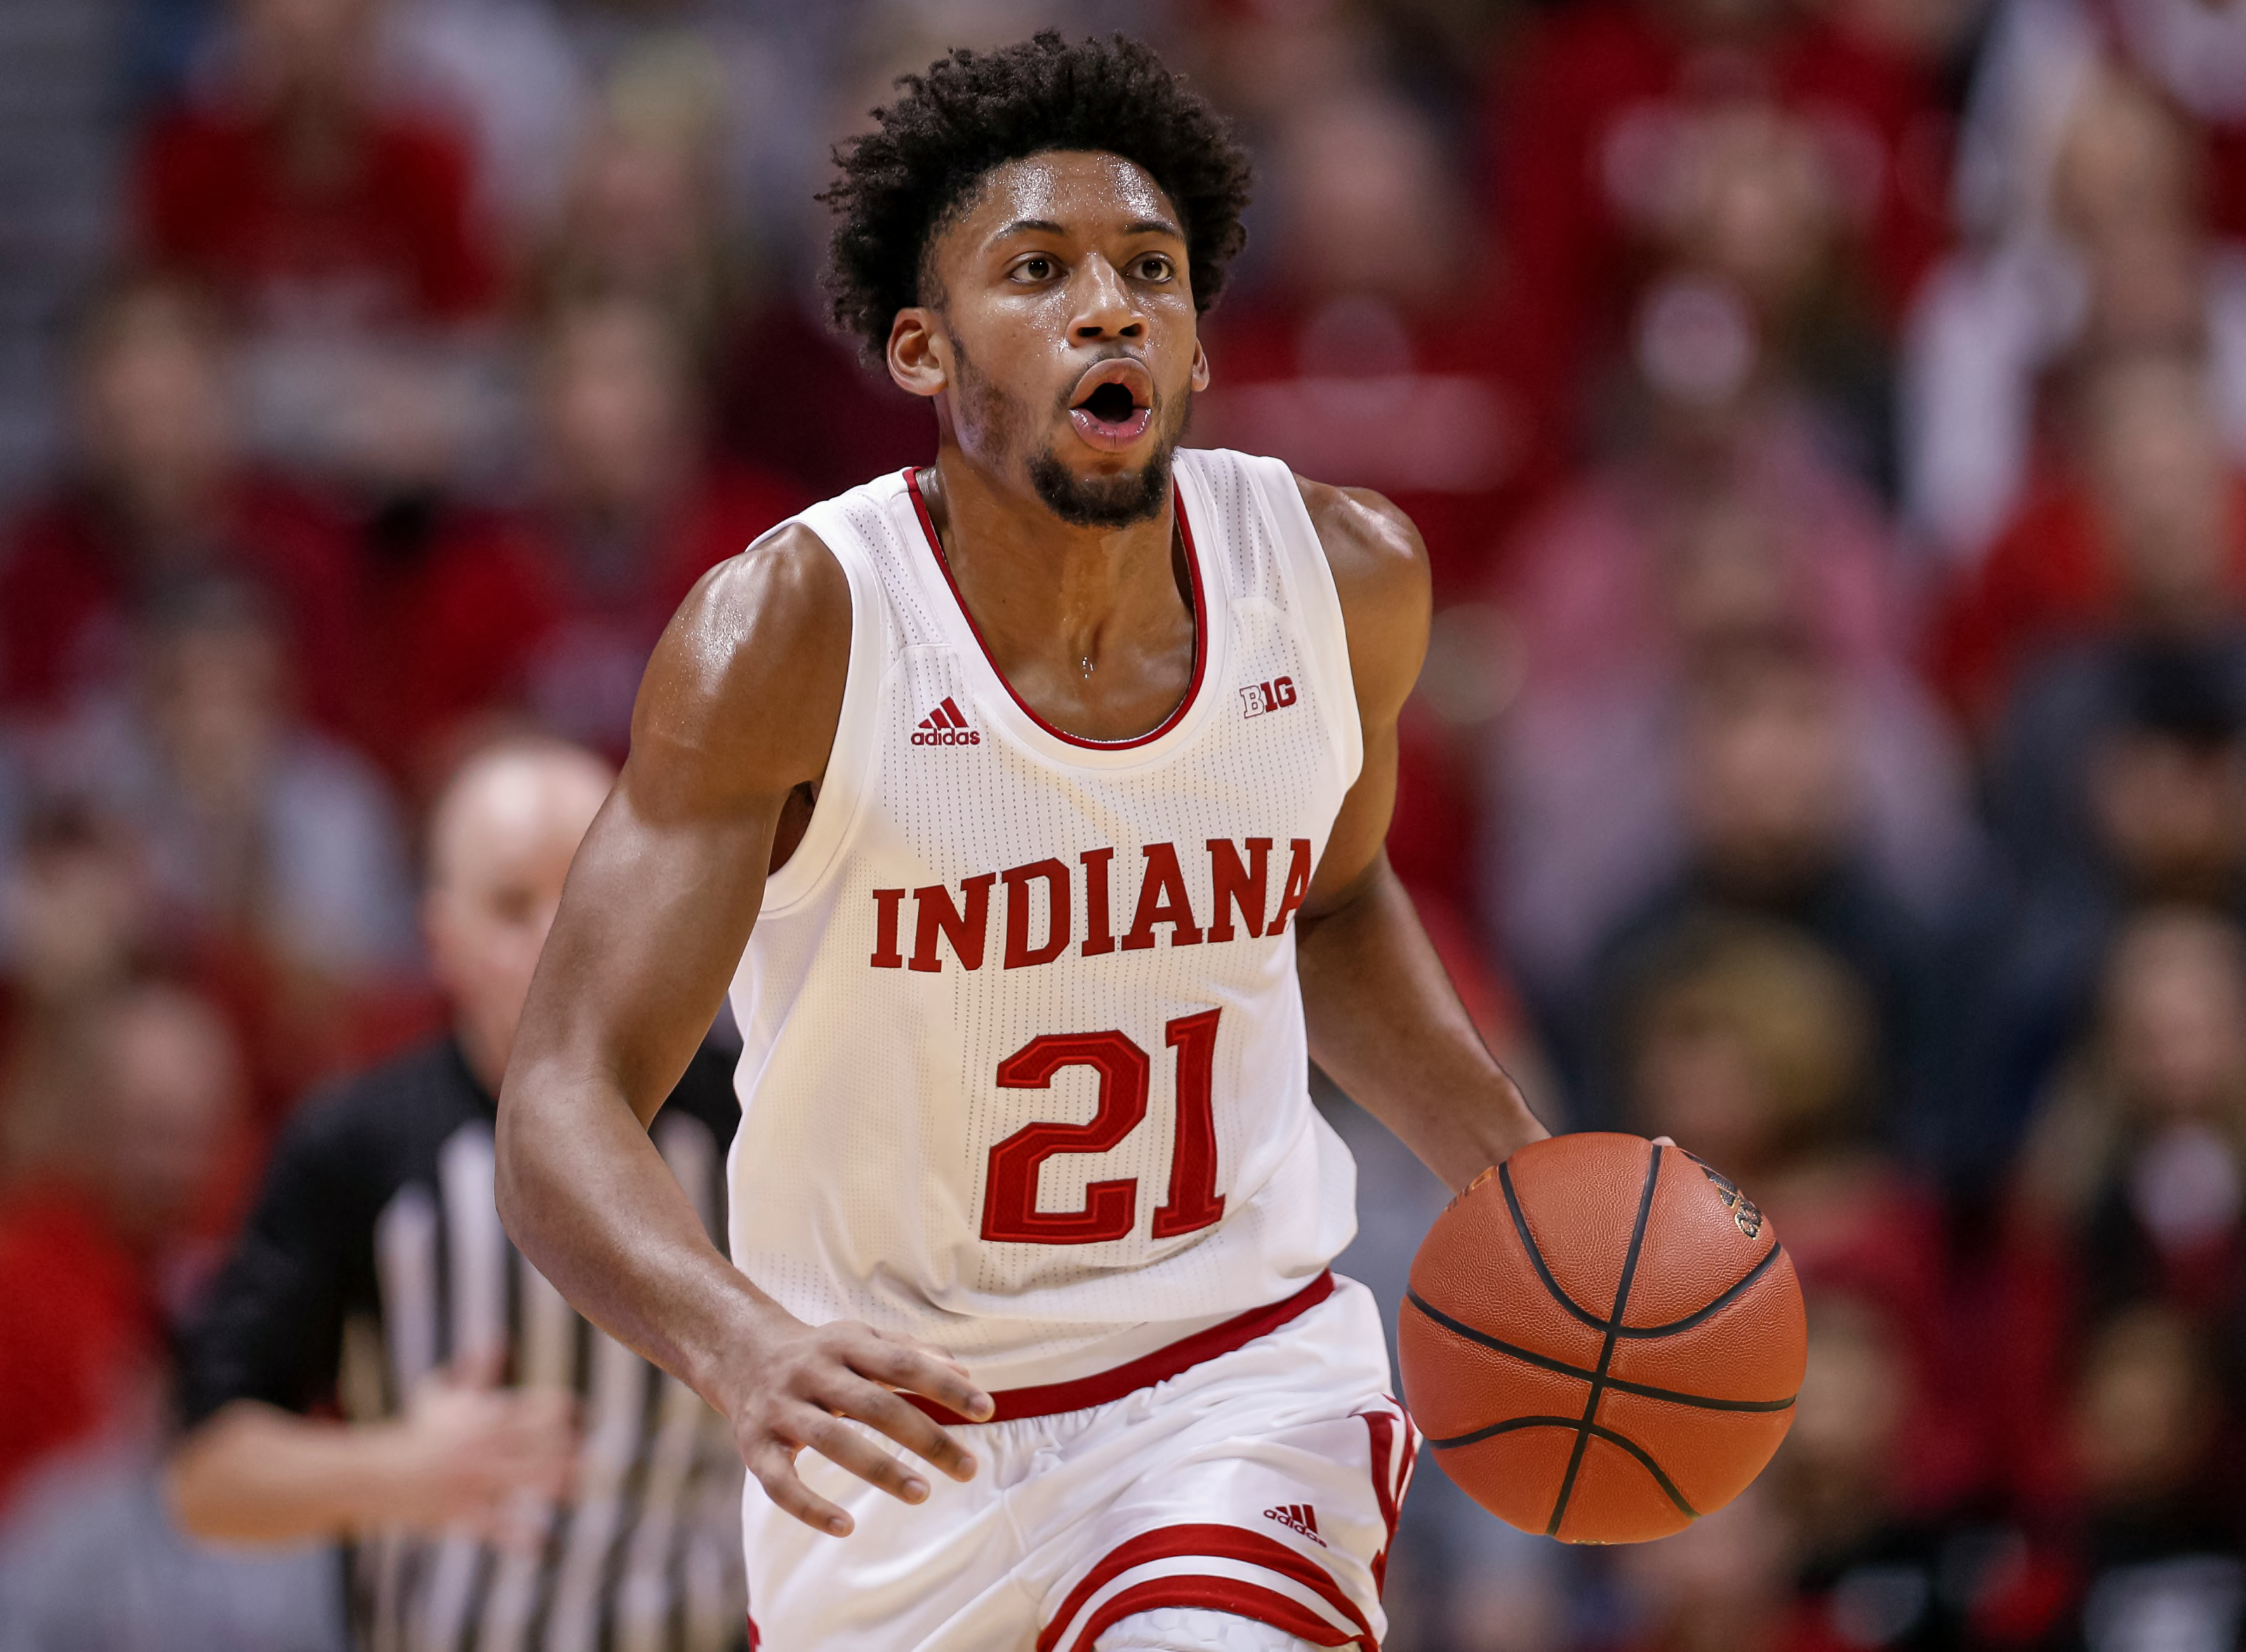 Indiana Basketball 202021 season preview for the Hoosiers